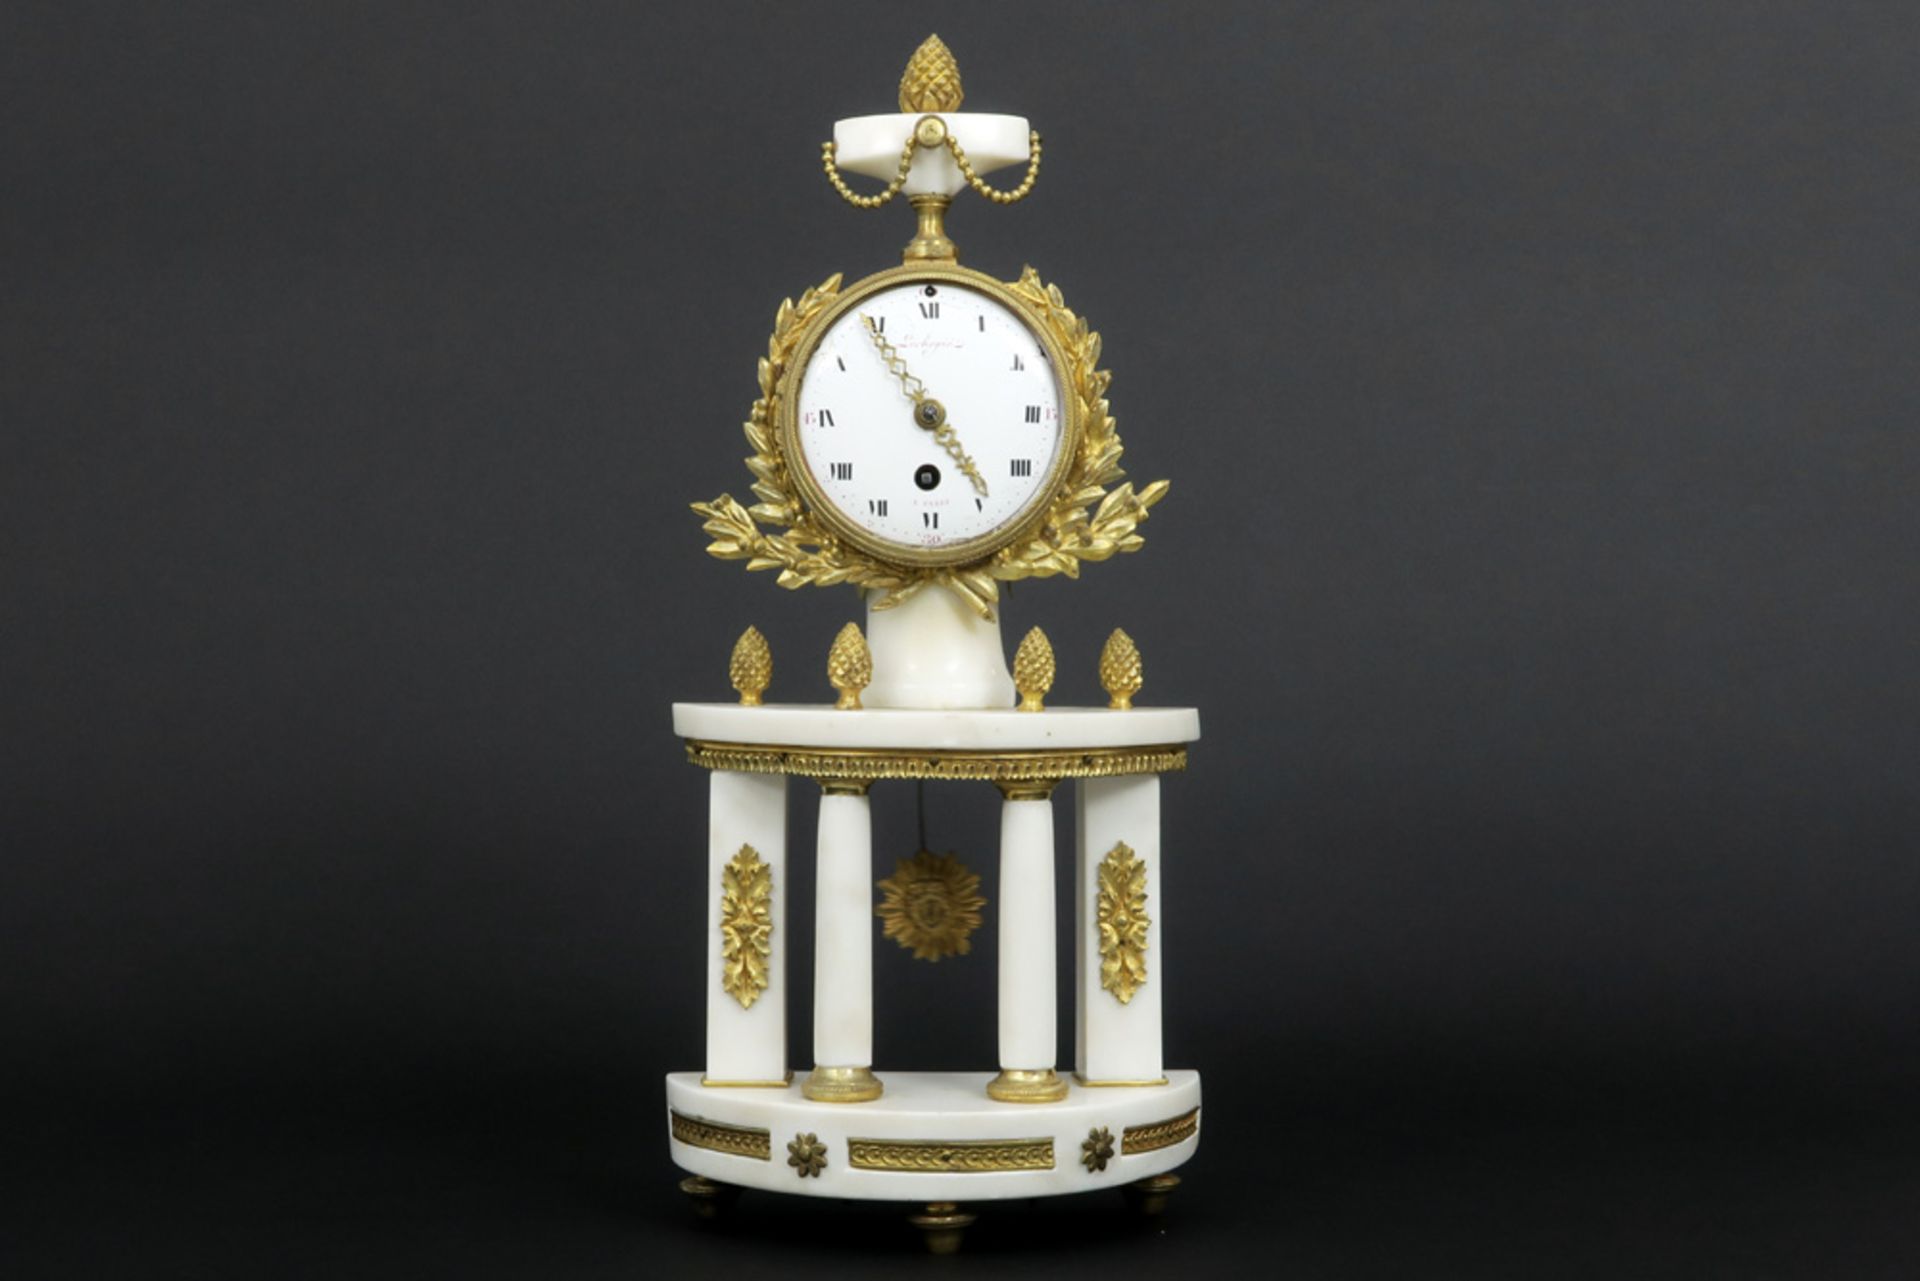 late 18th Cent. French "Lechopié Paris" Louis XVI-clock in white marble and gilded bronze - with a